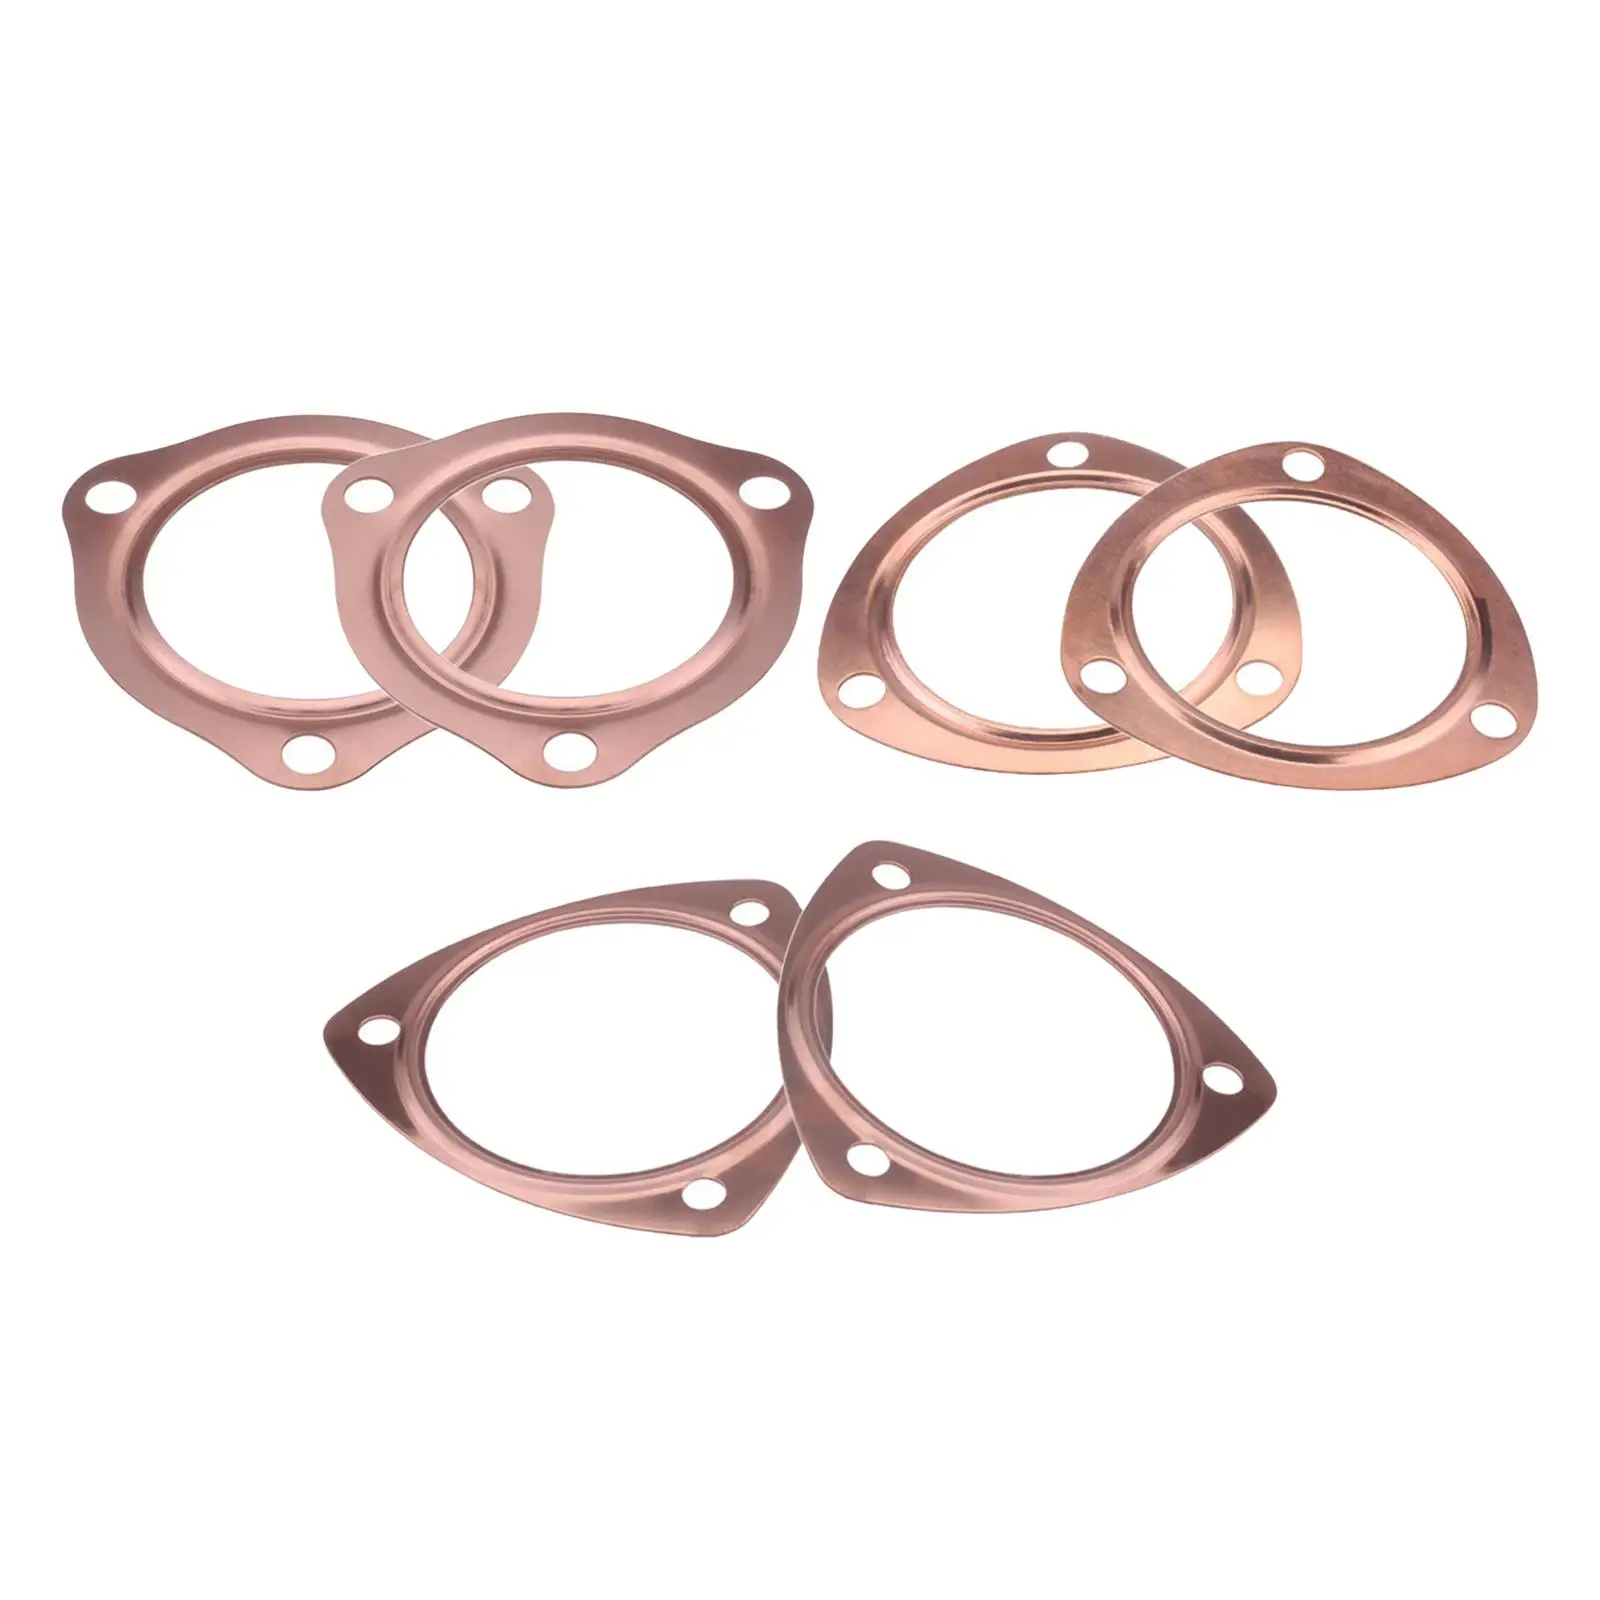 Copper Collector Gasket for Sbc 302 350 454 Automotive Replacement